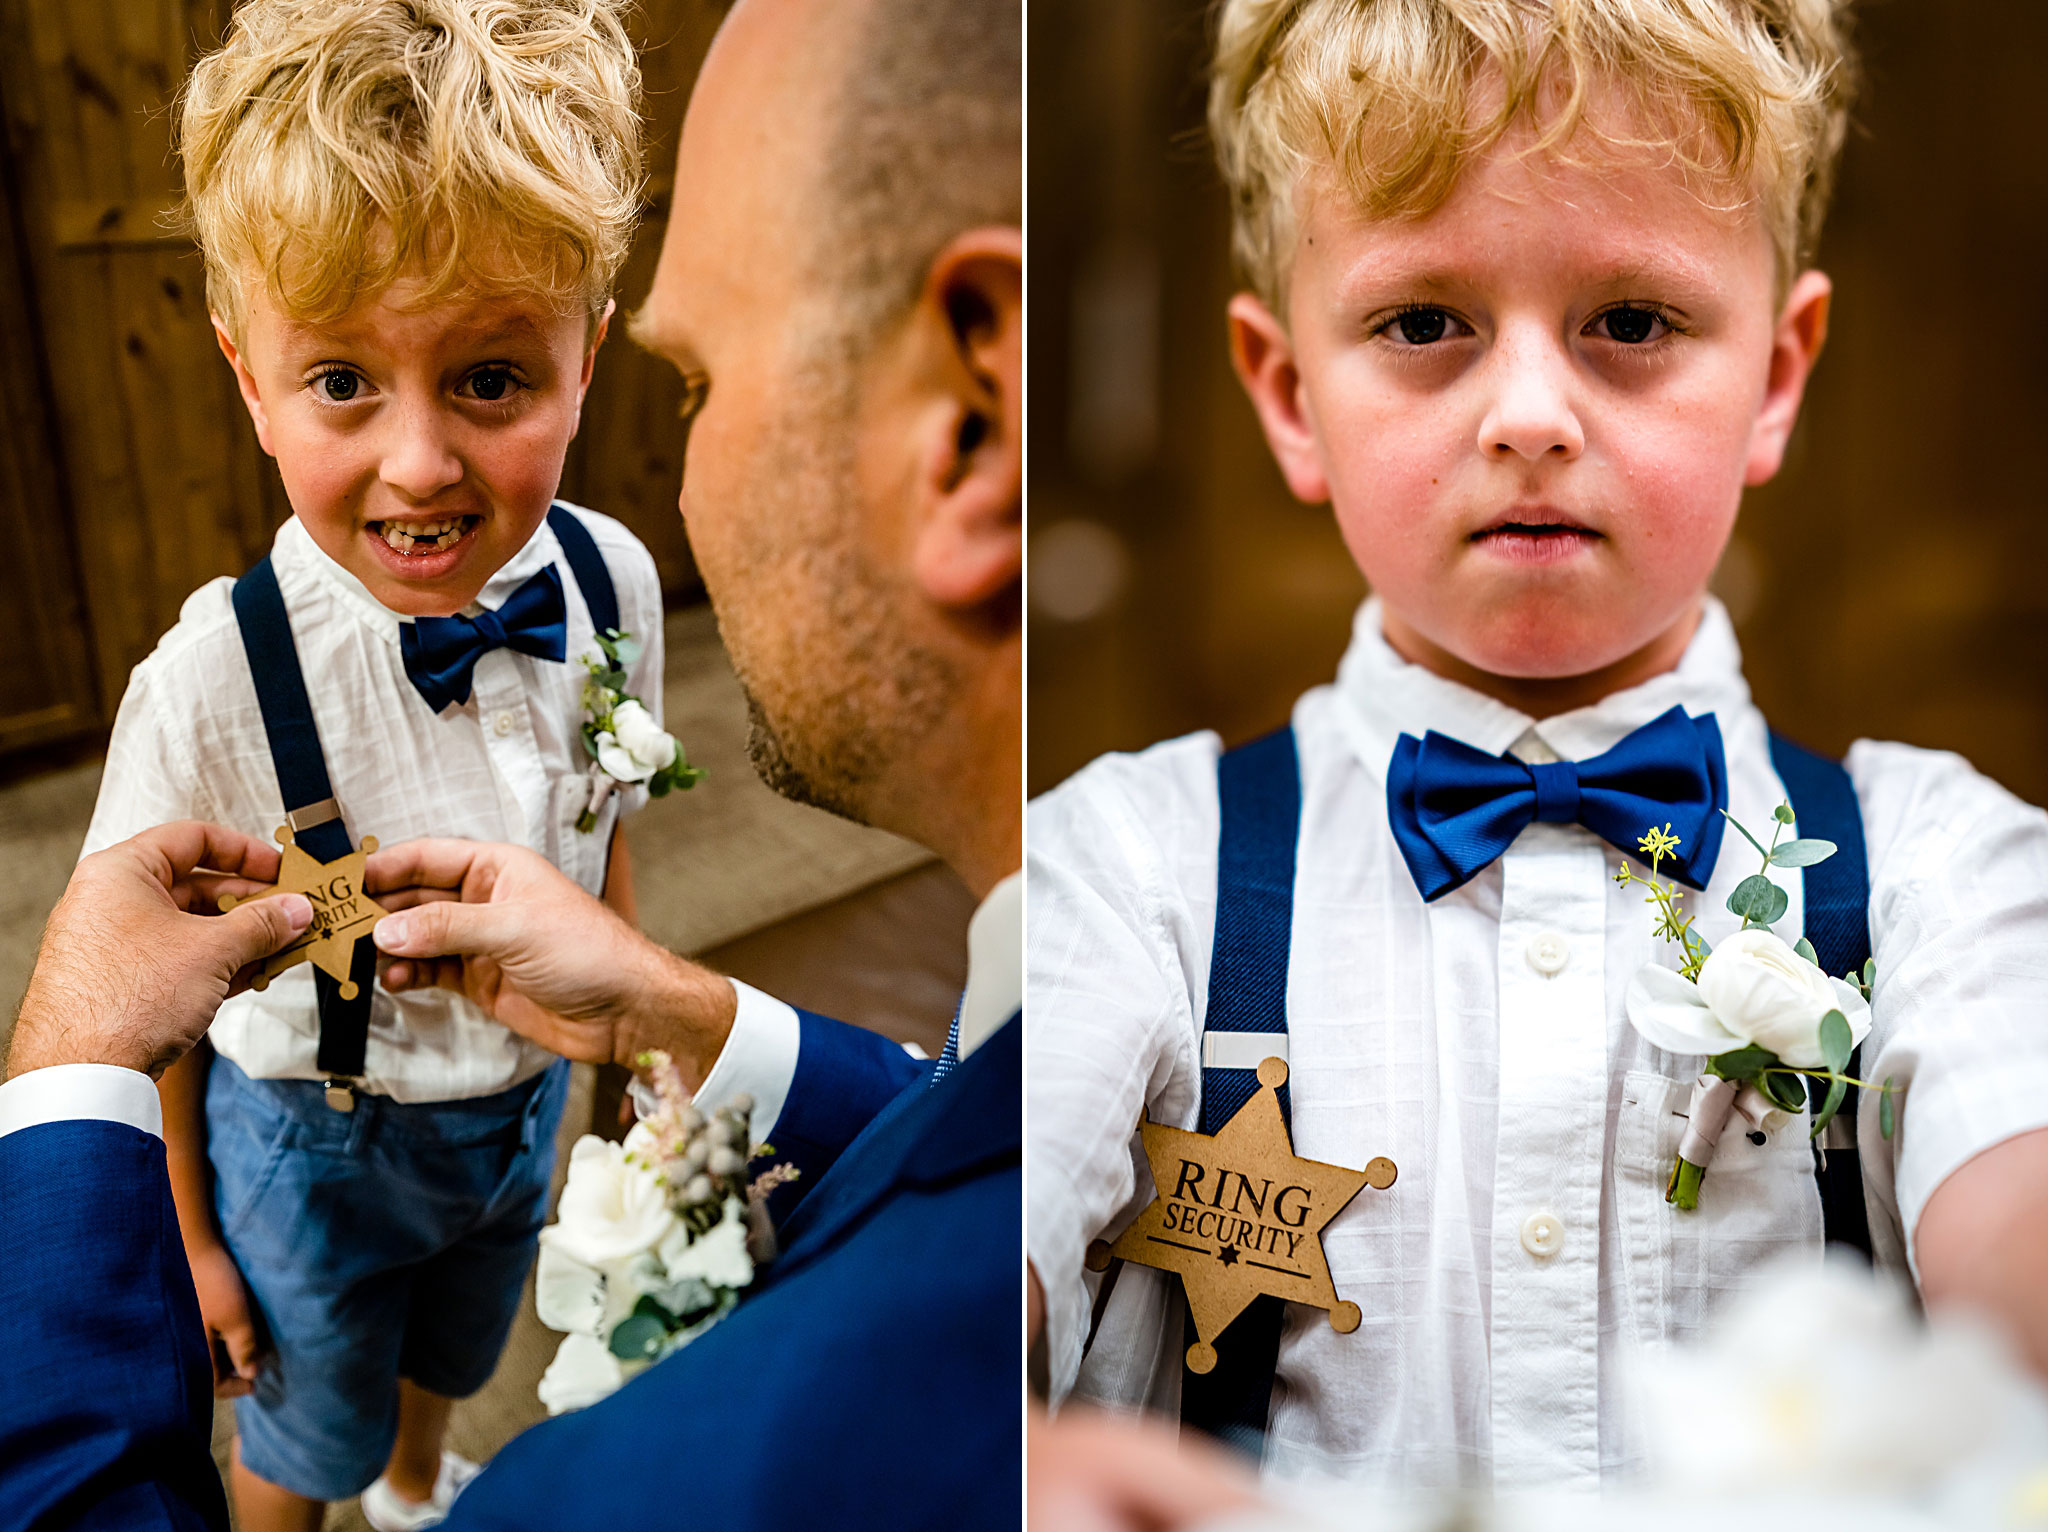 Ring Bearer with a Ring Security Badge. Kelli & Jason's golf course wedding at The Ranch Country Club by Colorado Wedding Photographer Jennifer Garza, Small wedding ideas, Intimate wedding, Golf Course Wedding, Country Club Wedding, Summer Wedding, Golf Wedding, Wedding planning, Colorado Wedding Photographer, Colorado Elopement Photographer, Colorado Elopement, Colorado Wedding, Denver Wedding Photographer, Denver Wedding, Wedding Inspiration, Summer Wedding Inspiration, Colorado Bride